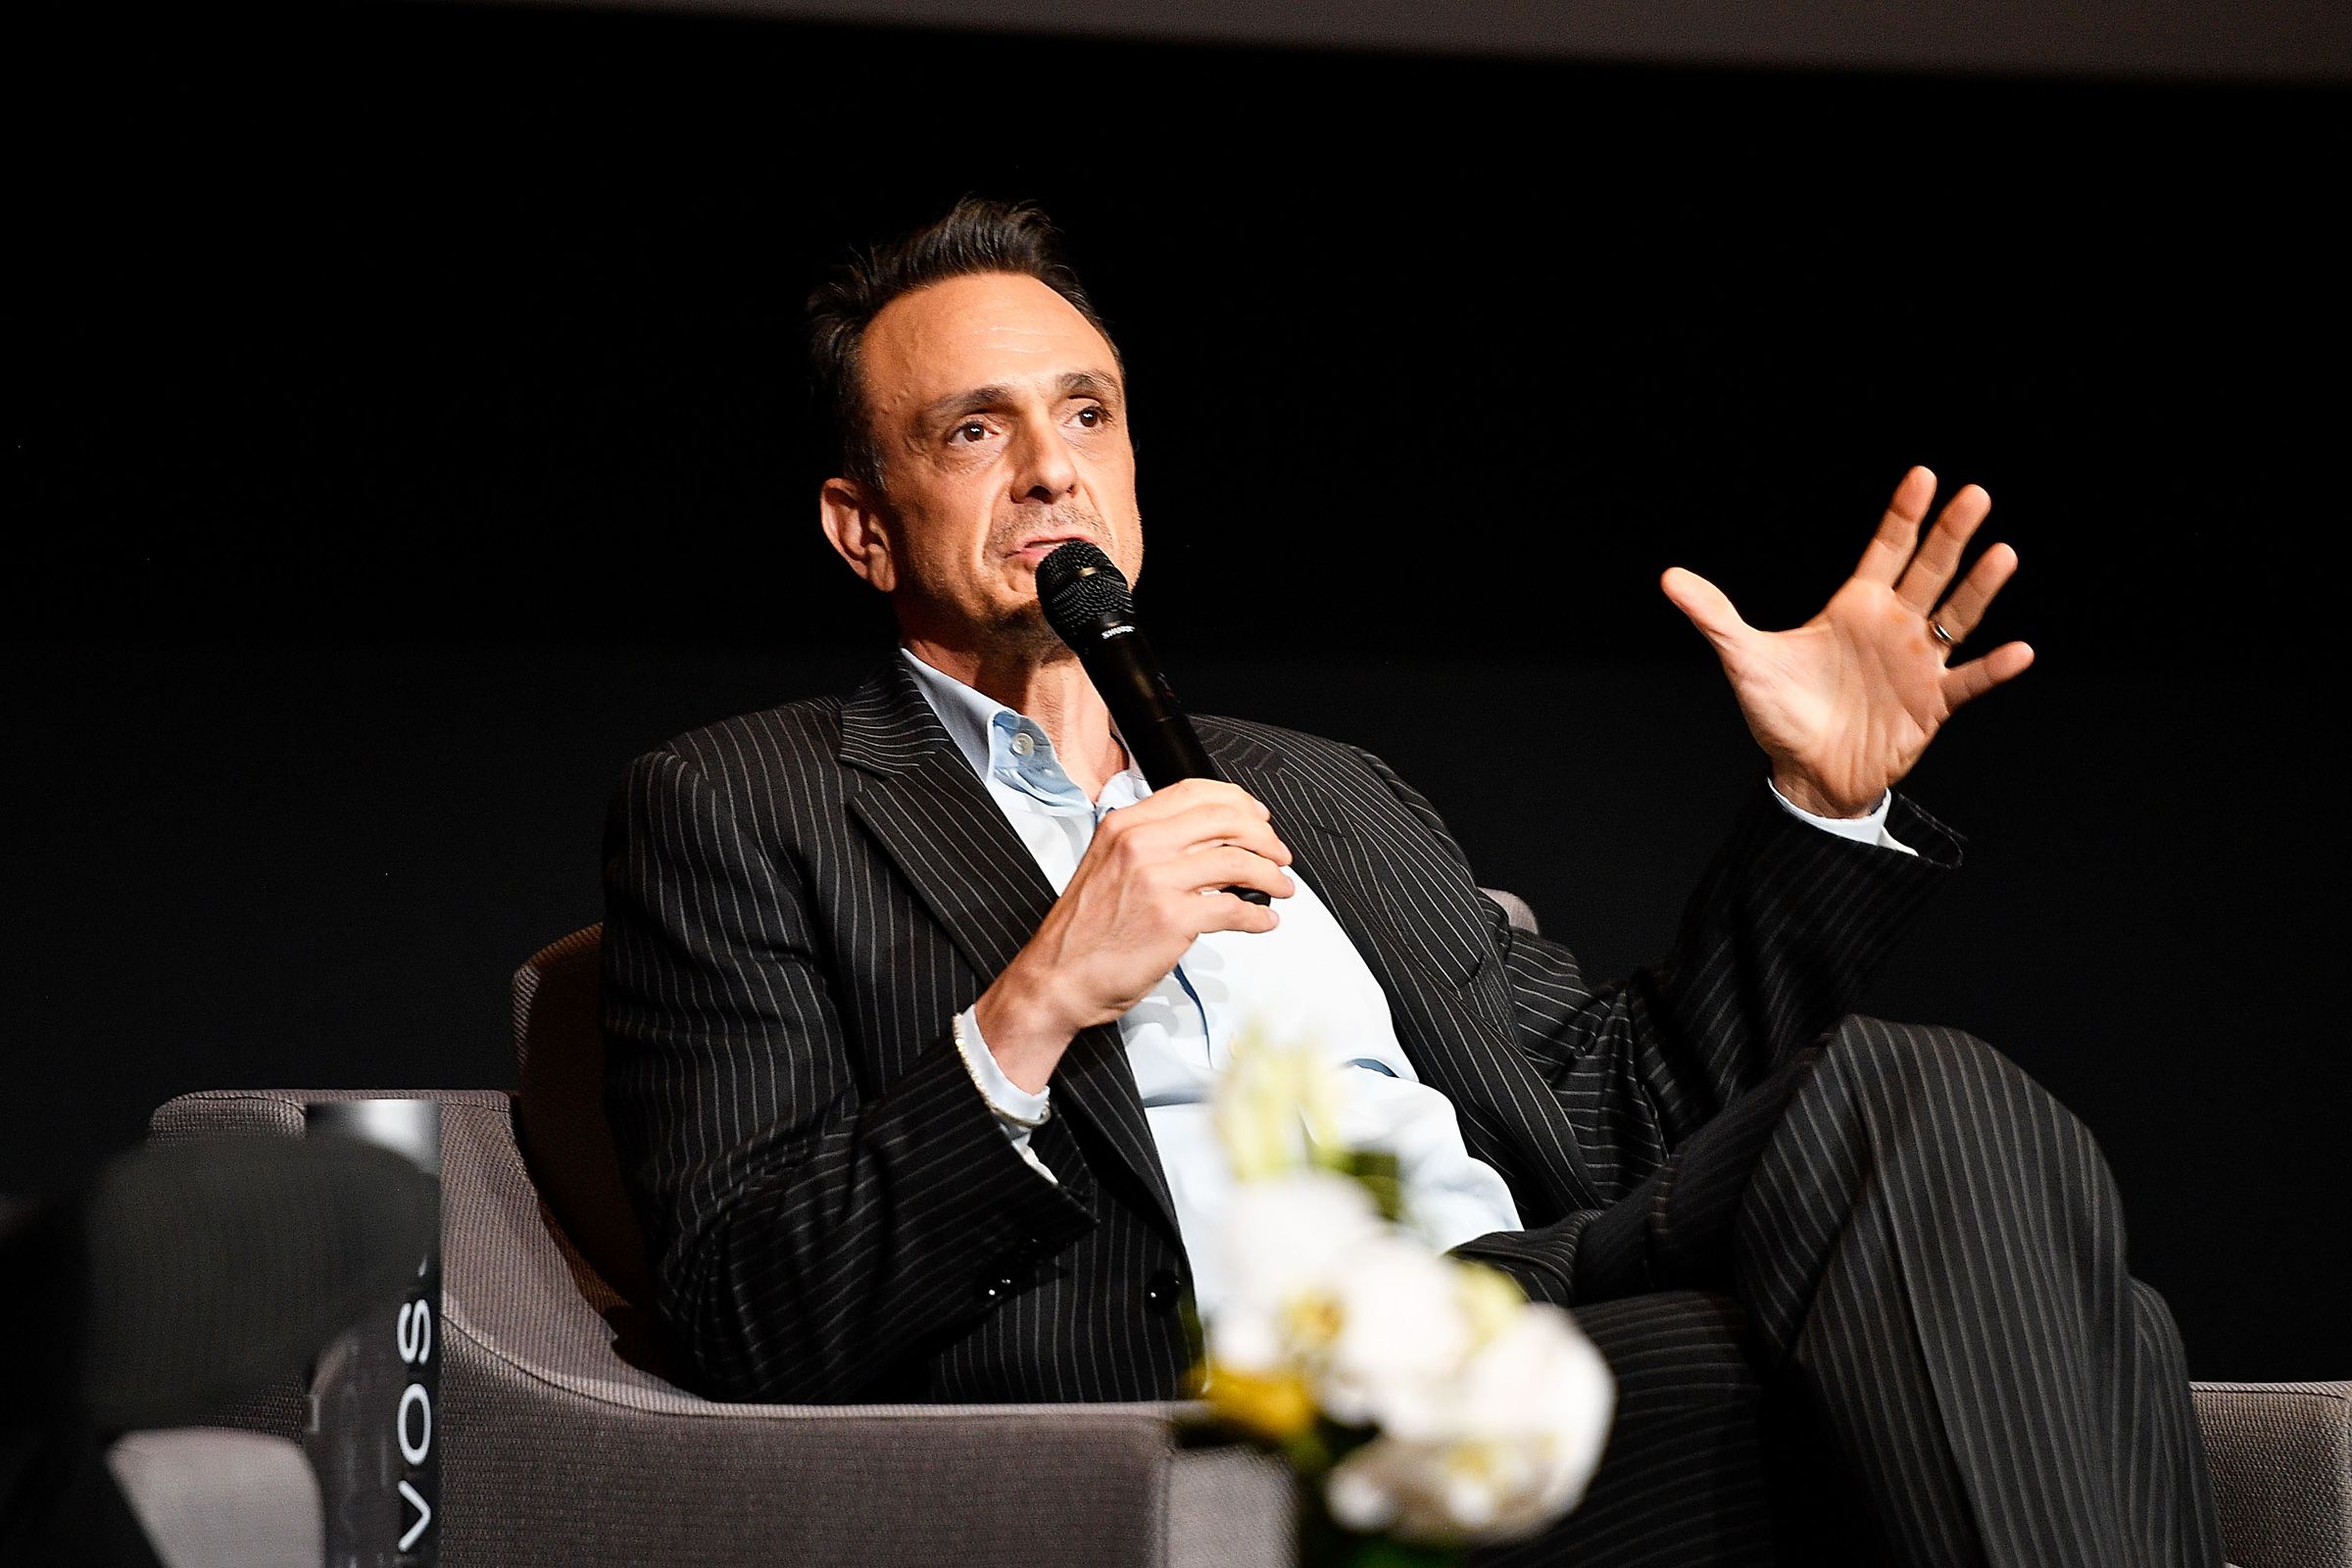 FYC Event For IFC's 'Brockmire' And 'Documentary Now!' - Inside